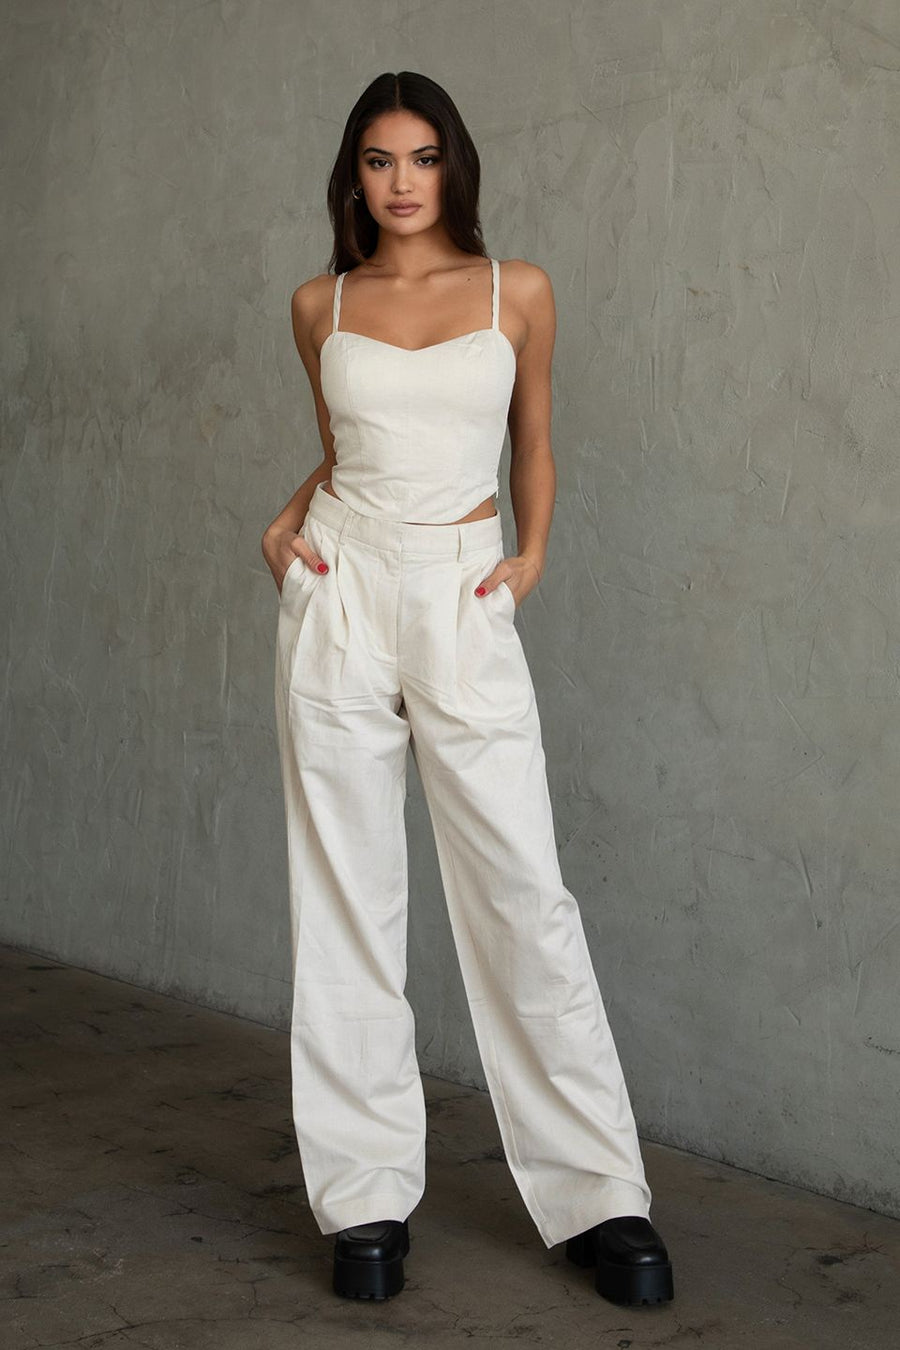 Featuring a straight leg linen pant in the color Natural 